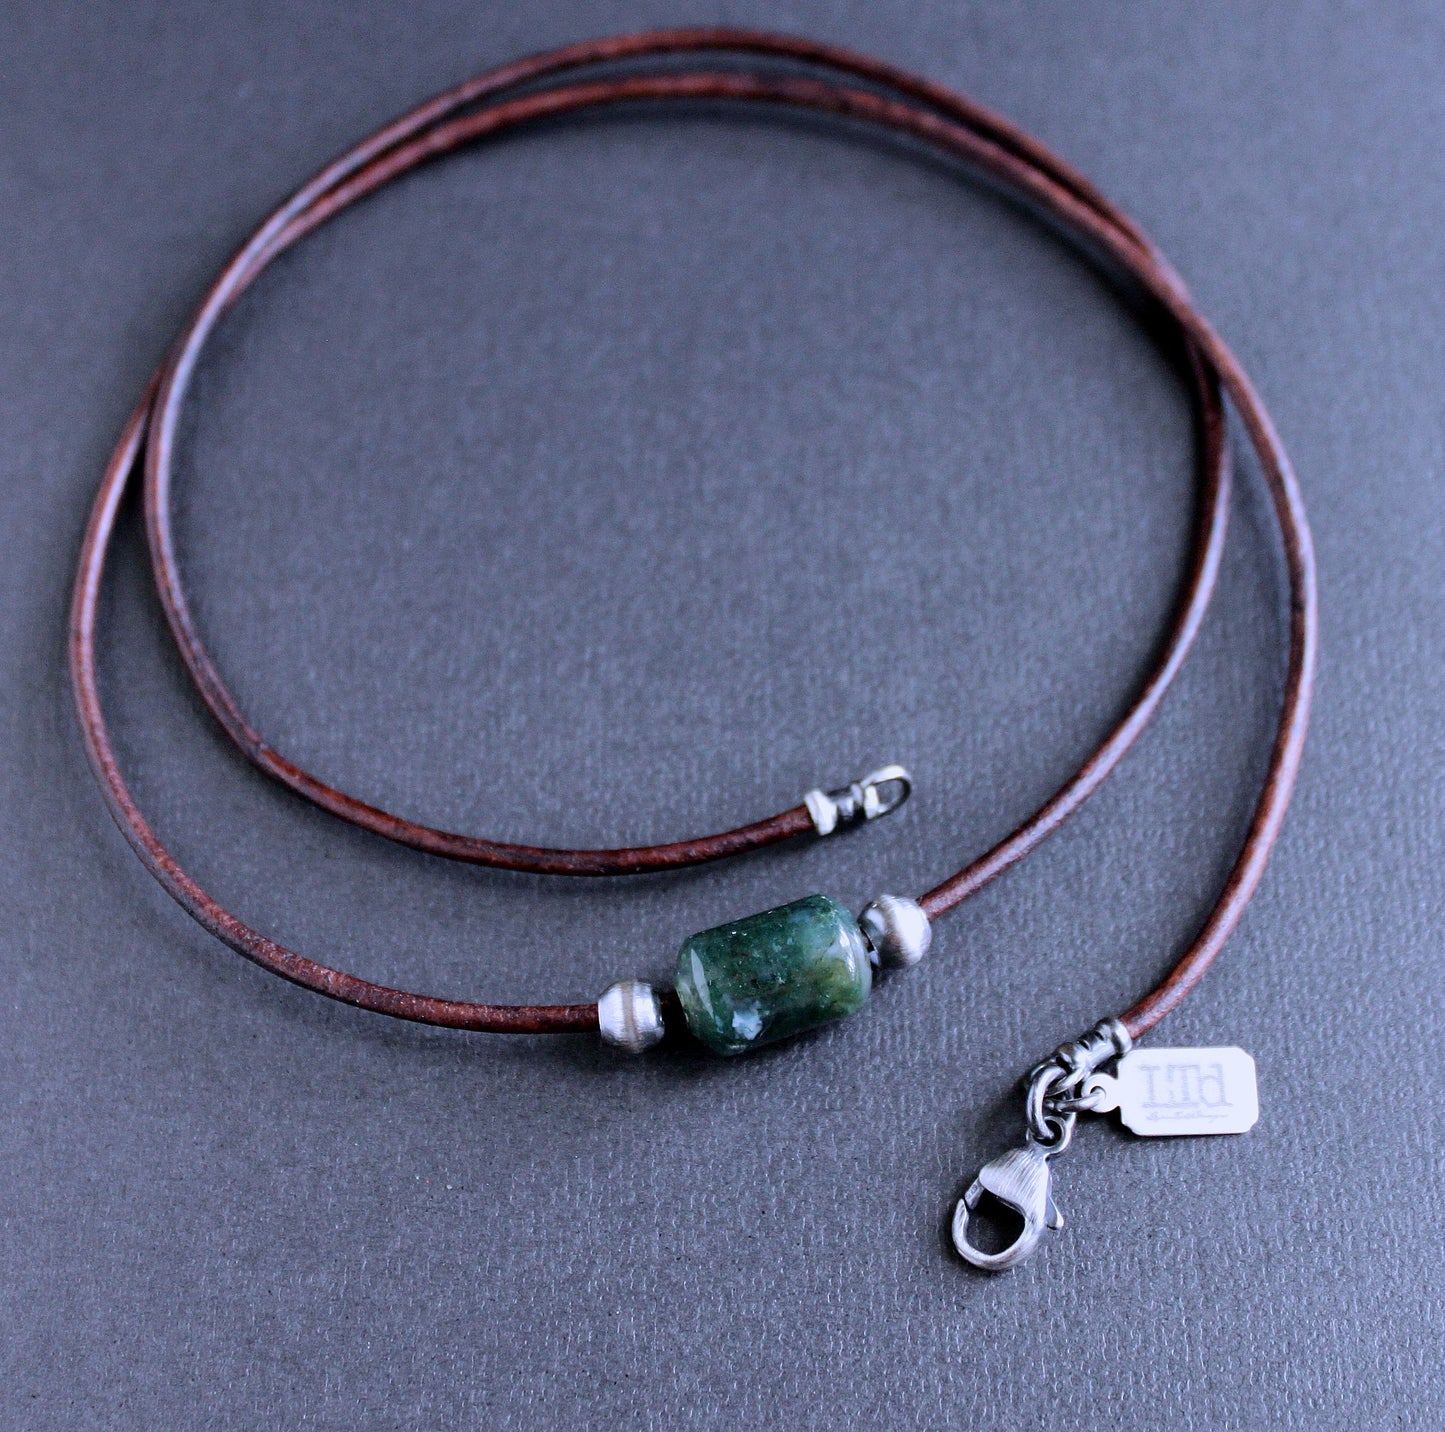 men's brown leather cord necklace